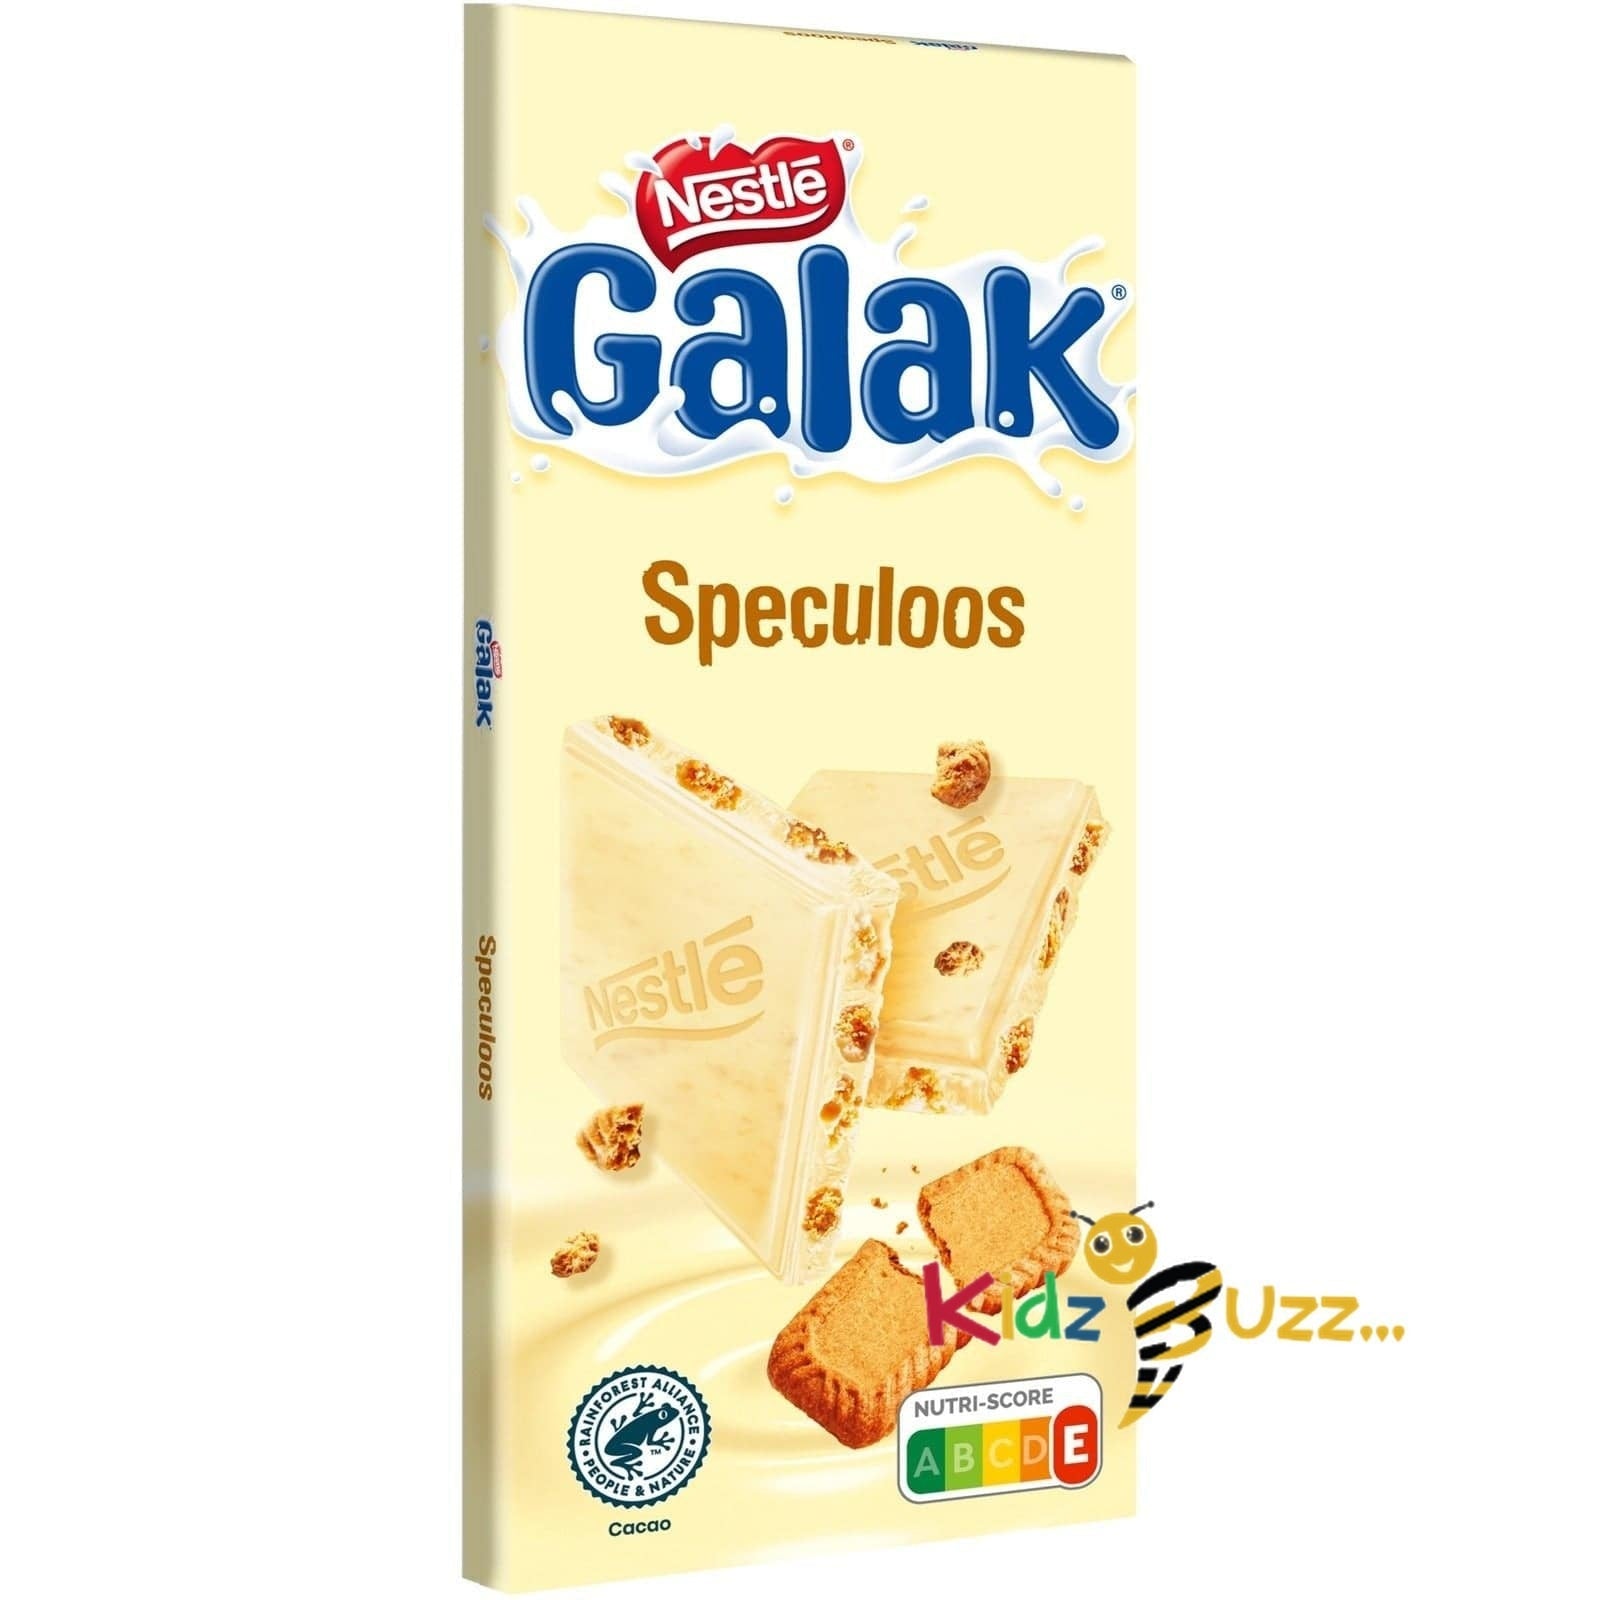 Nestlé Galak Speculoos Witte Chocolade Tablet White Chocolate Bar - 125g